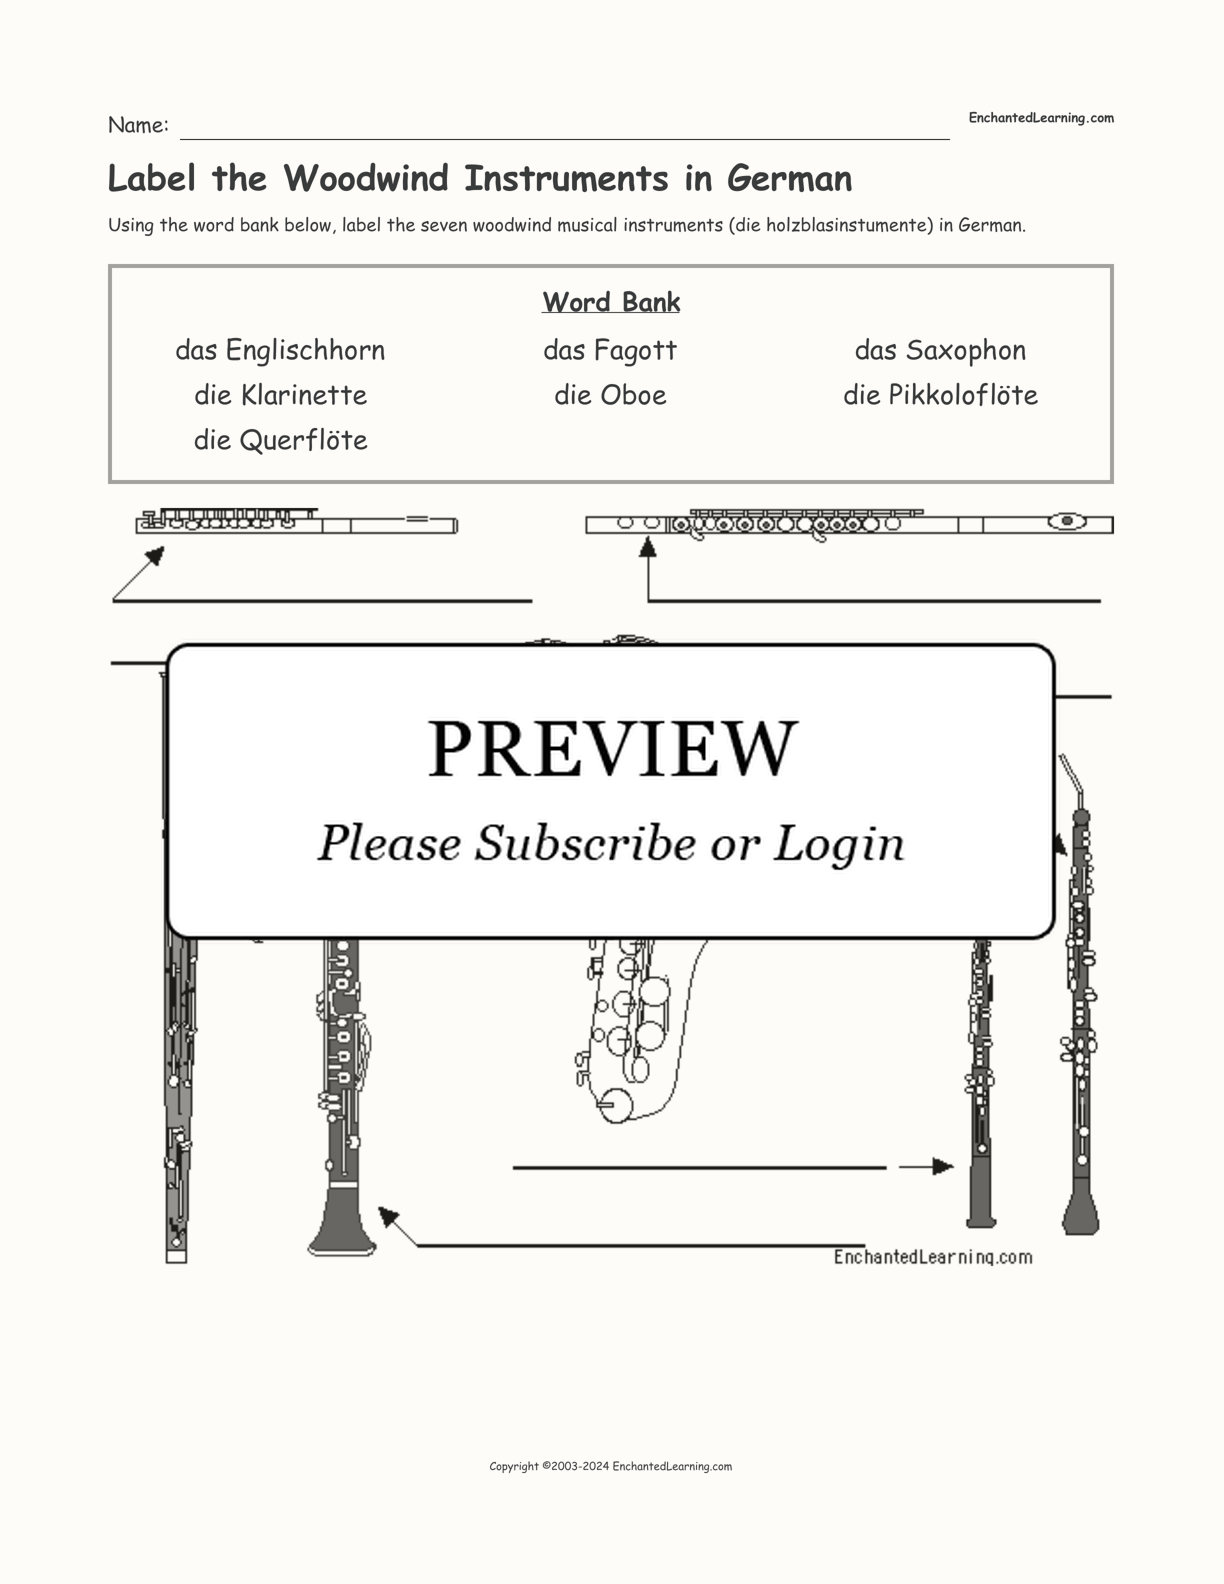 Label the Woodwind Instruments in German interactive worksheet page 1